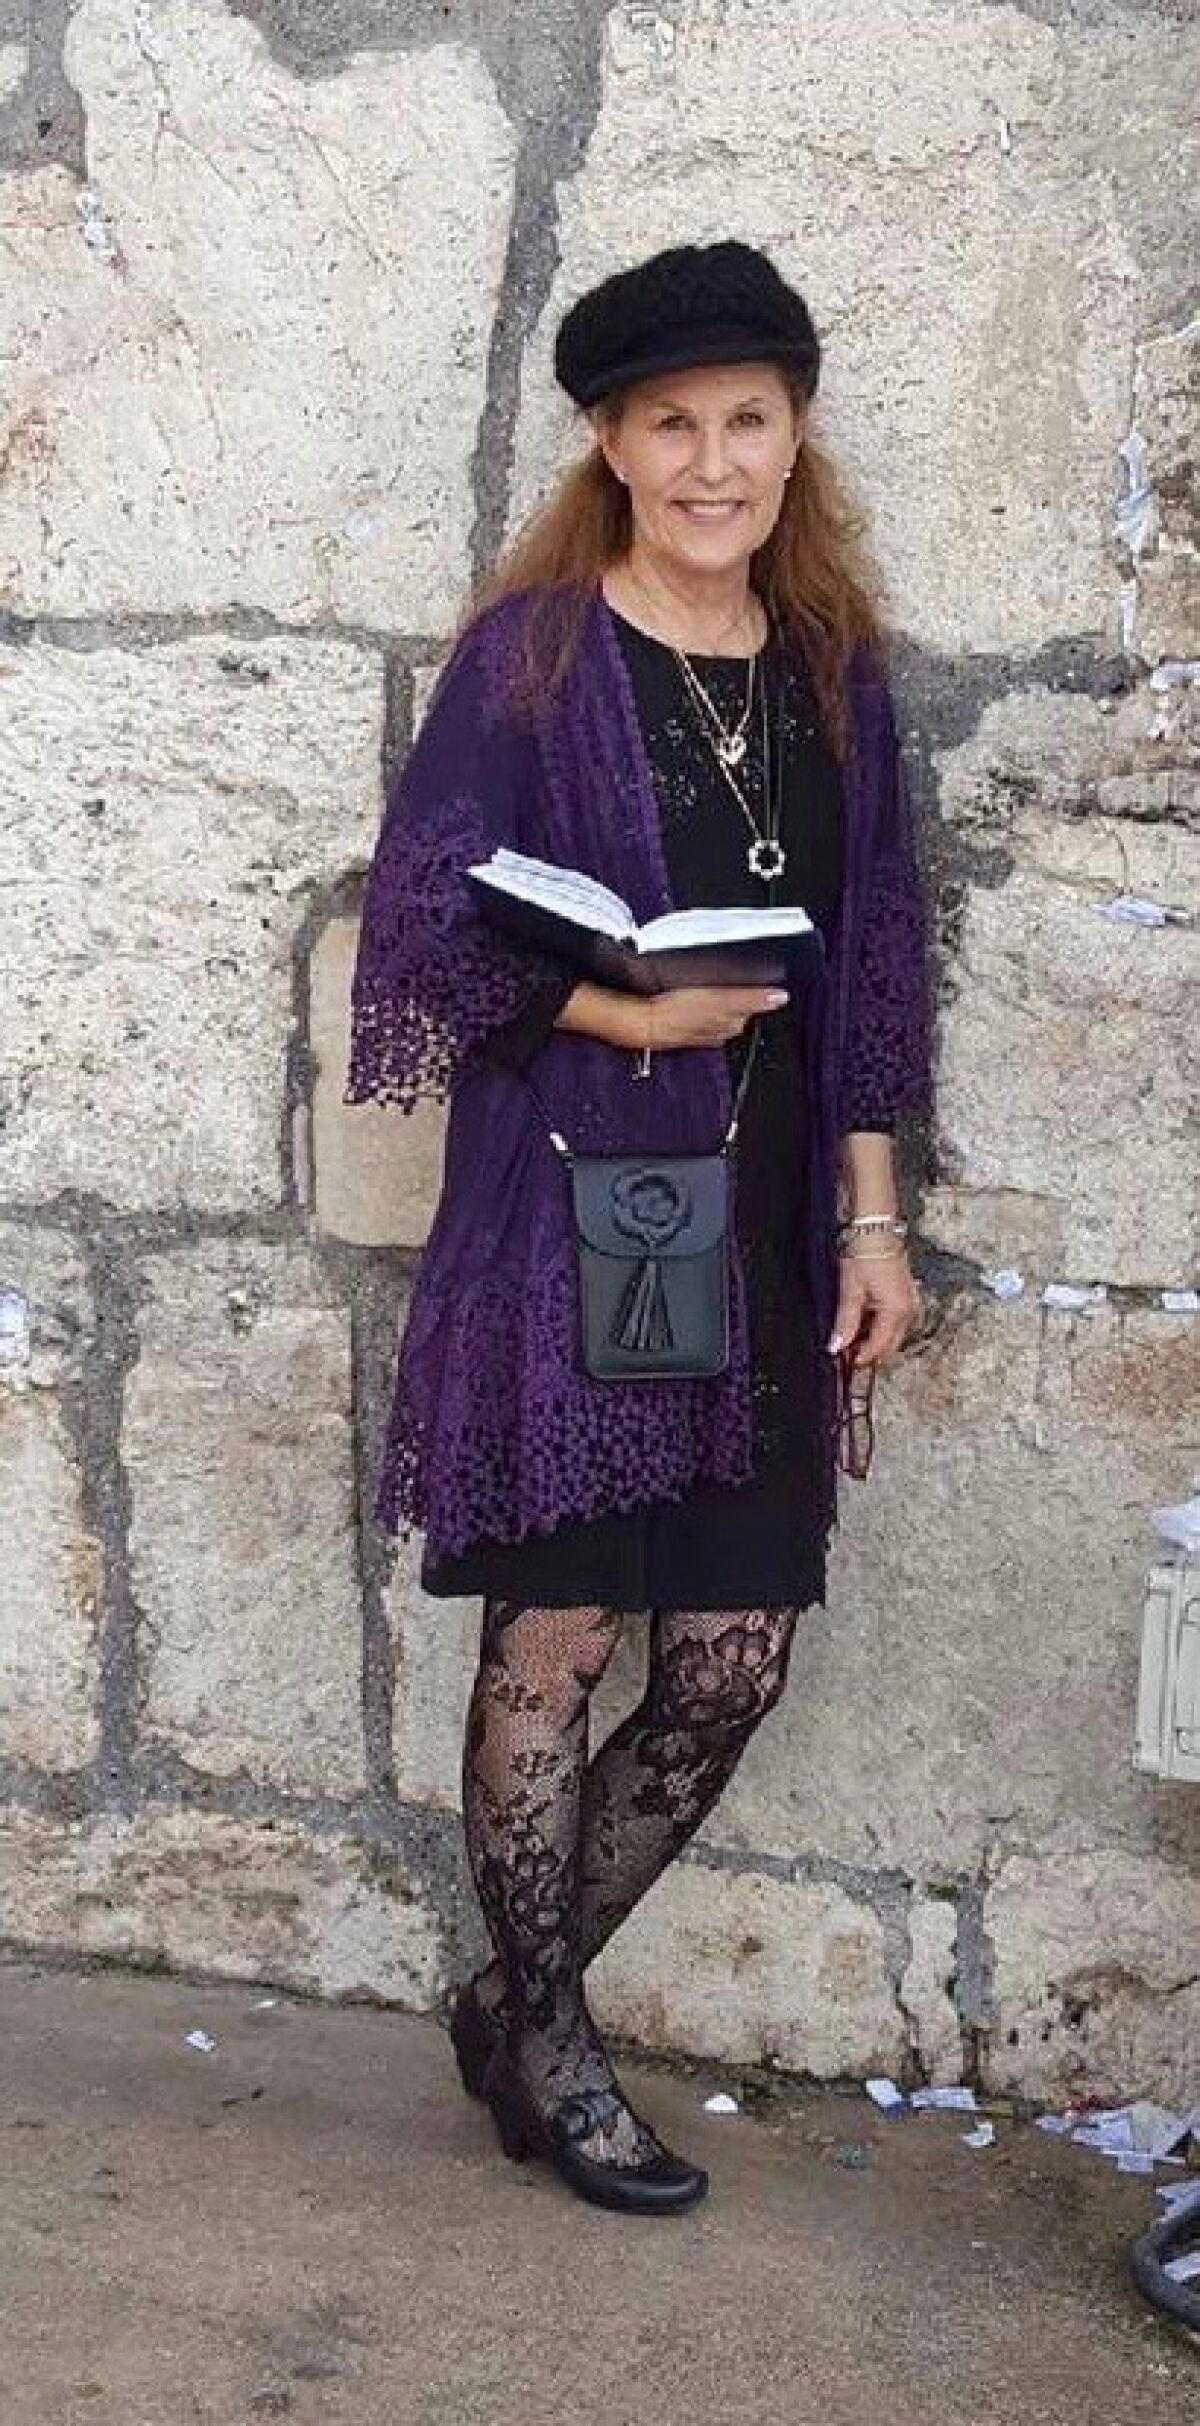 An undated photo of Lori Gilbert-Kaye leaning against a wall outside and holding an open book